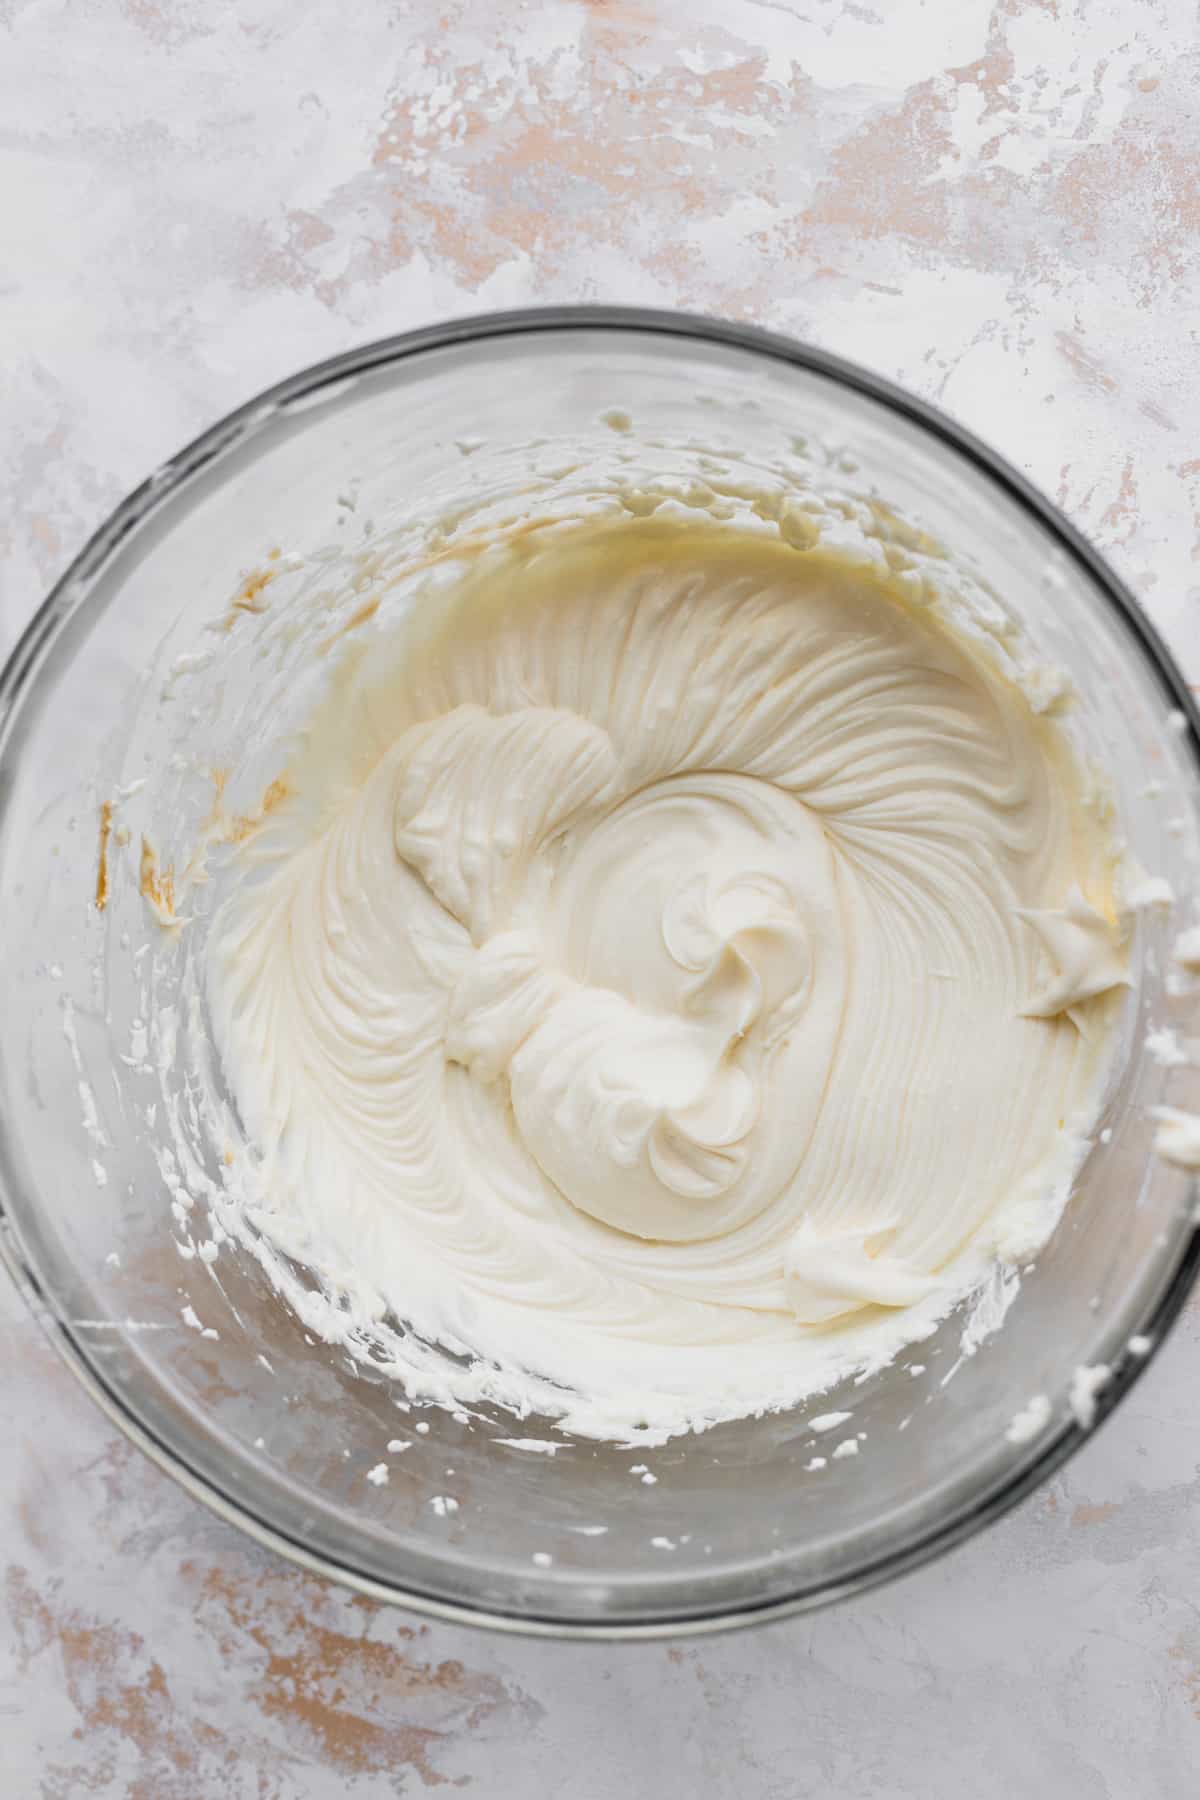 Cream cheese batter in a glass bowl.